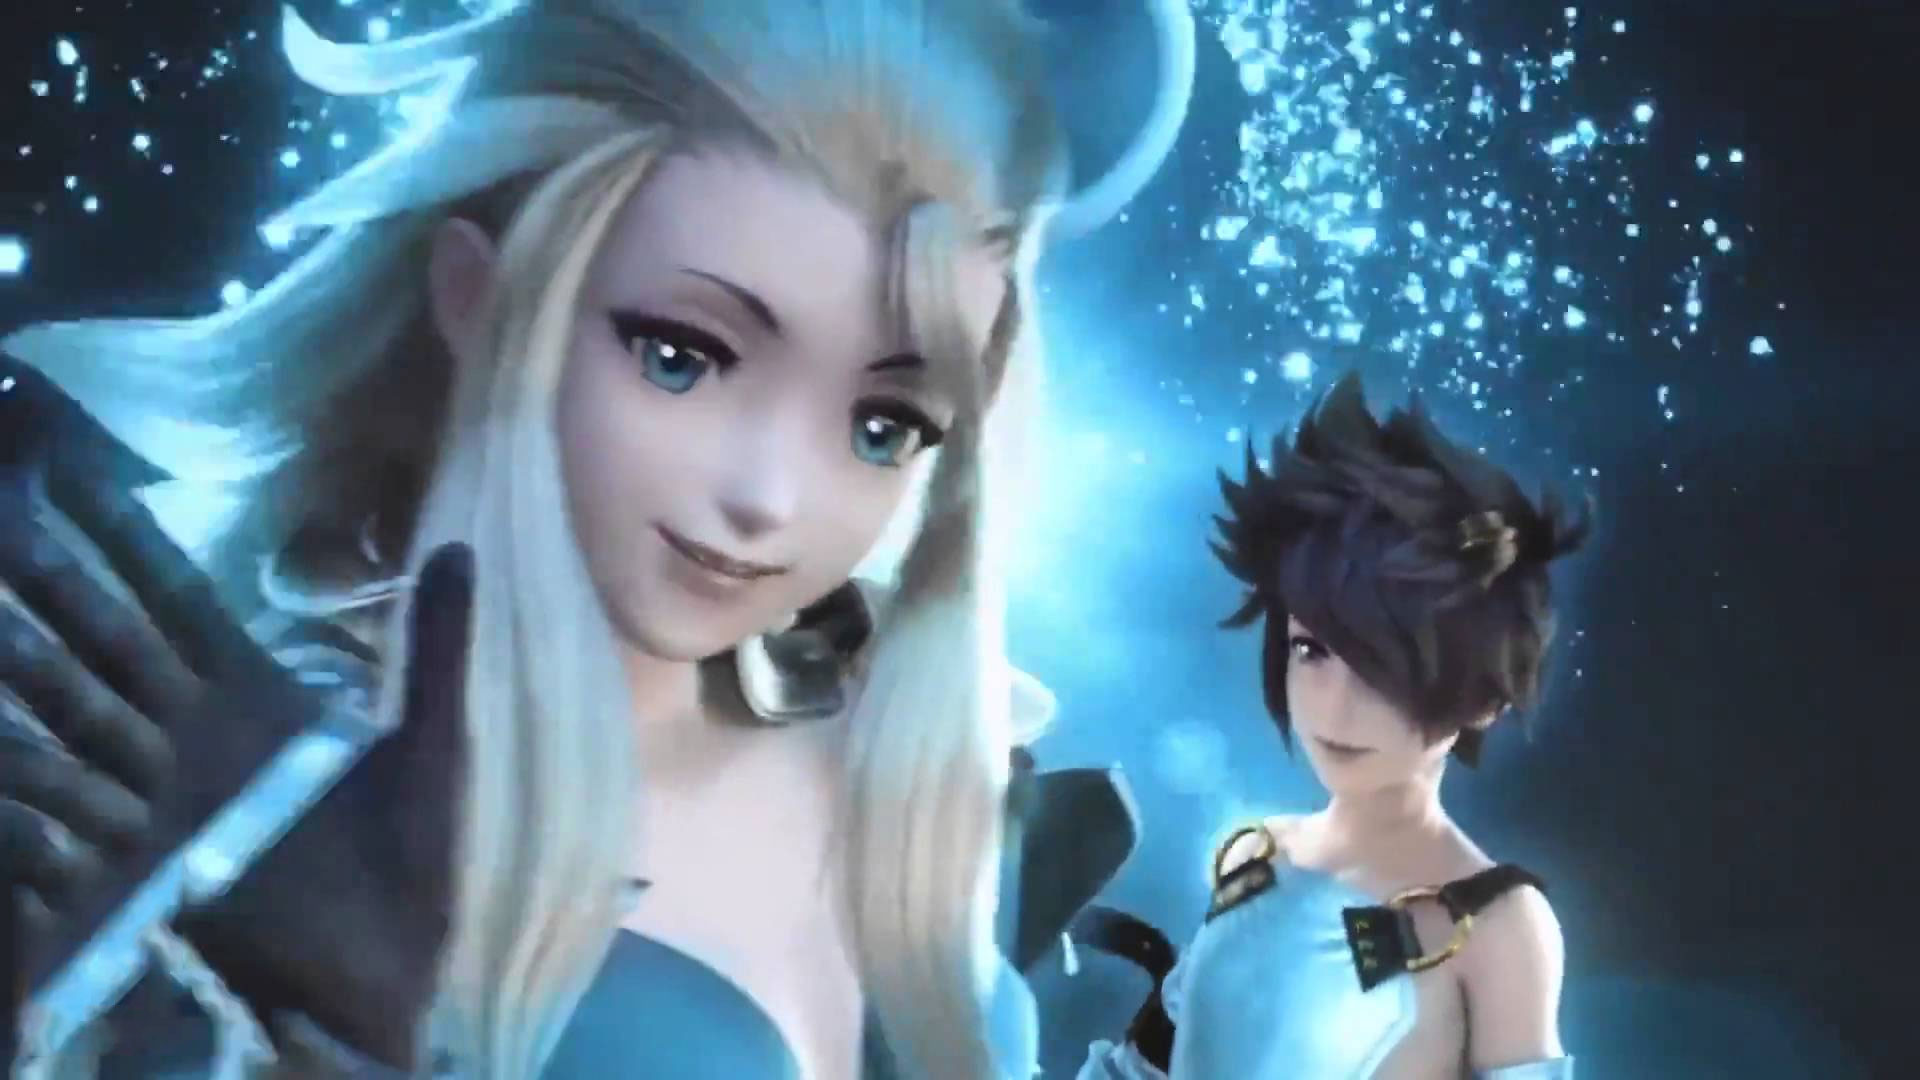 bravely second wallpaper,cg artwork,animated cartoon,anime,animation,fictional character